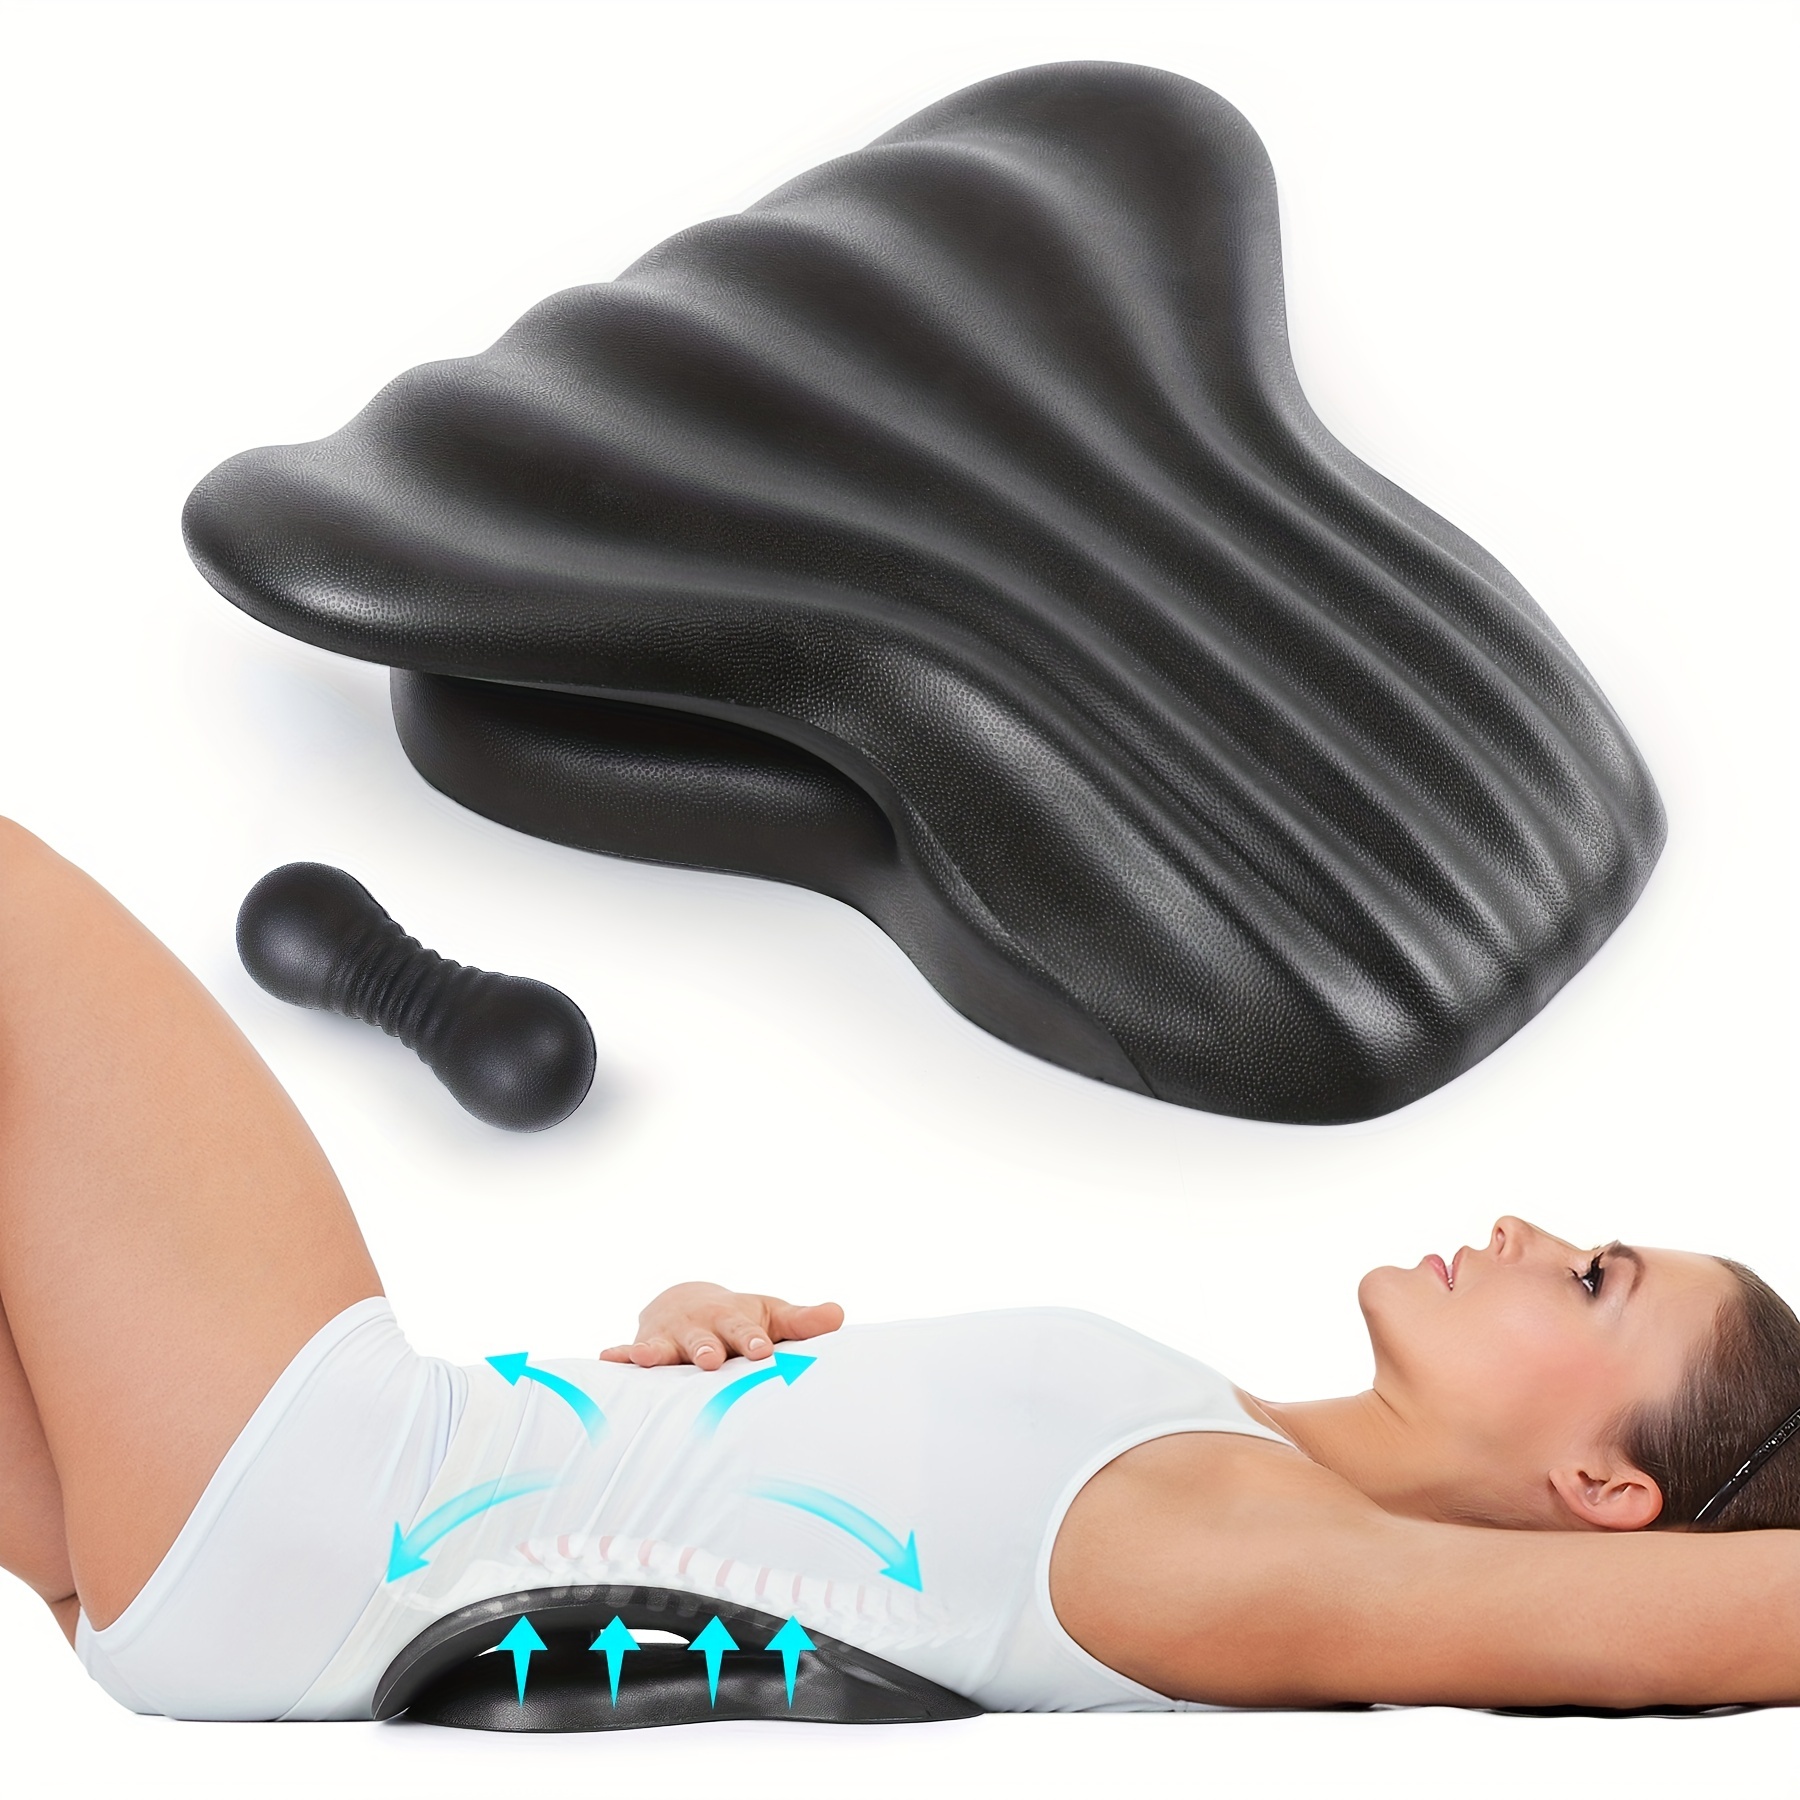 Back Right Therapuetic Lumbar Stretcher For Back Relaxation, Scoliosis,  Purple + Black